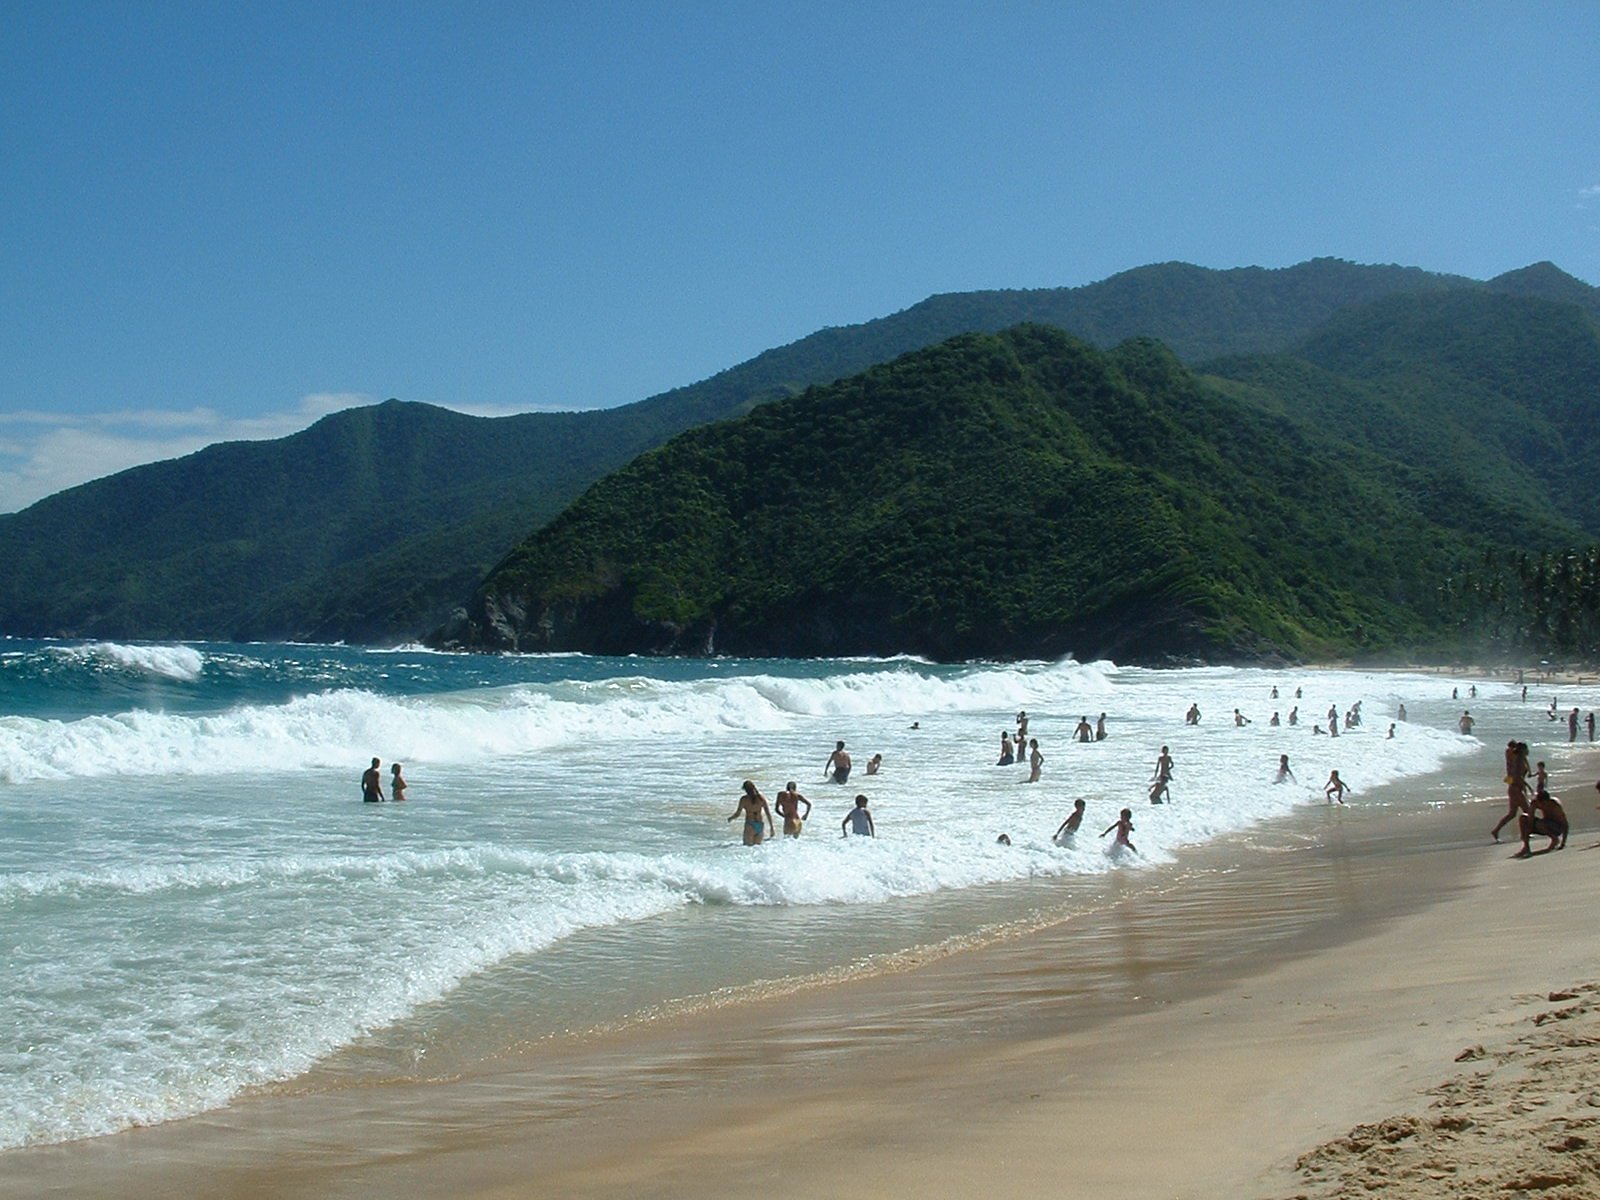 many people on the beach with a mountain in the background